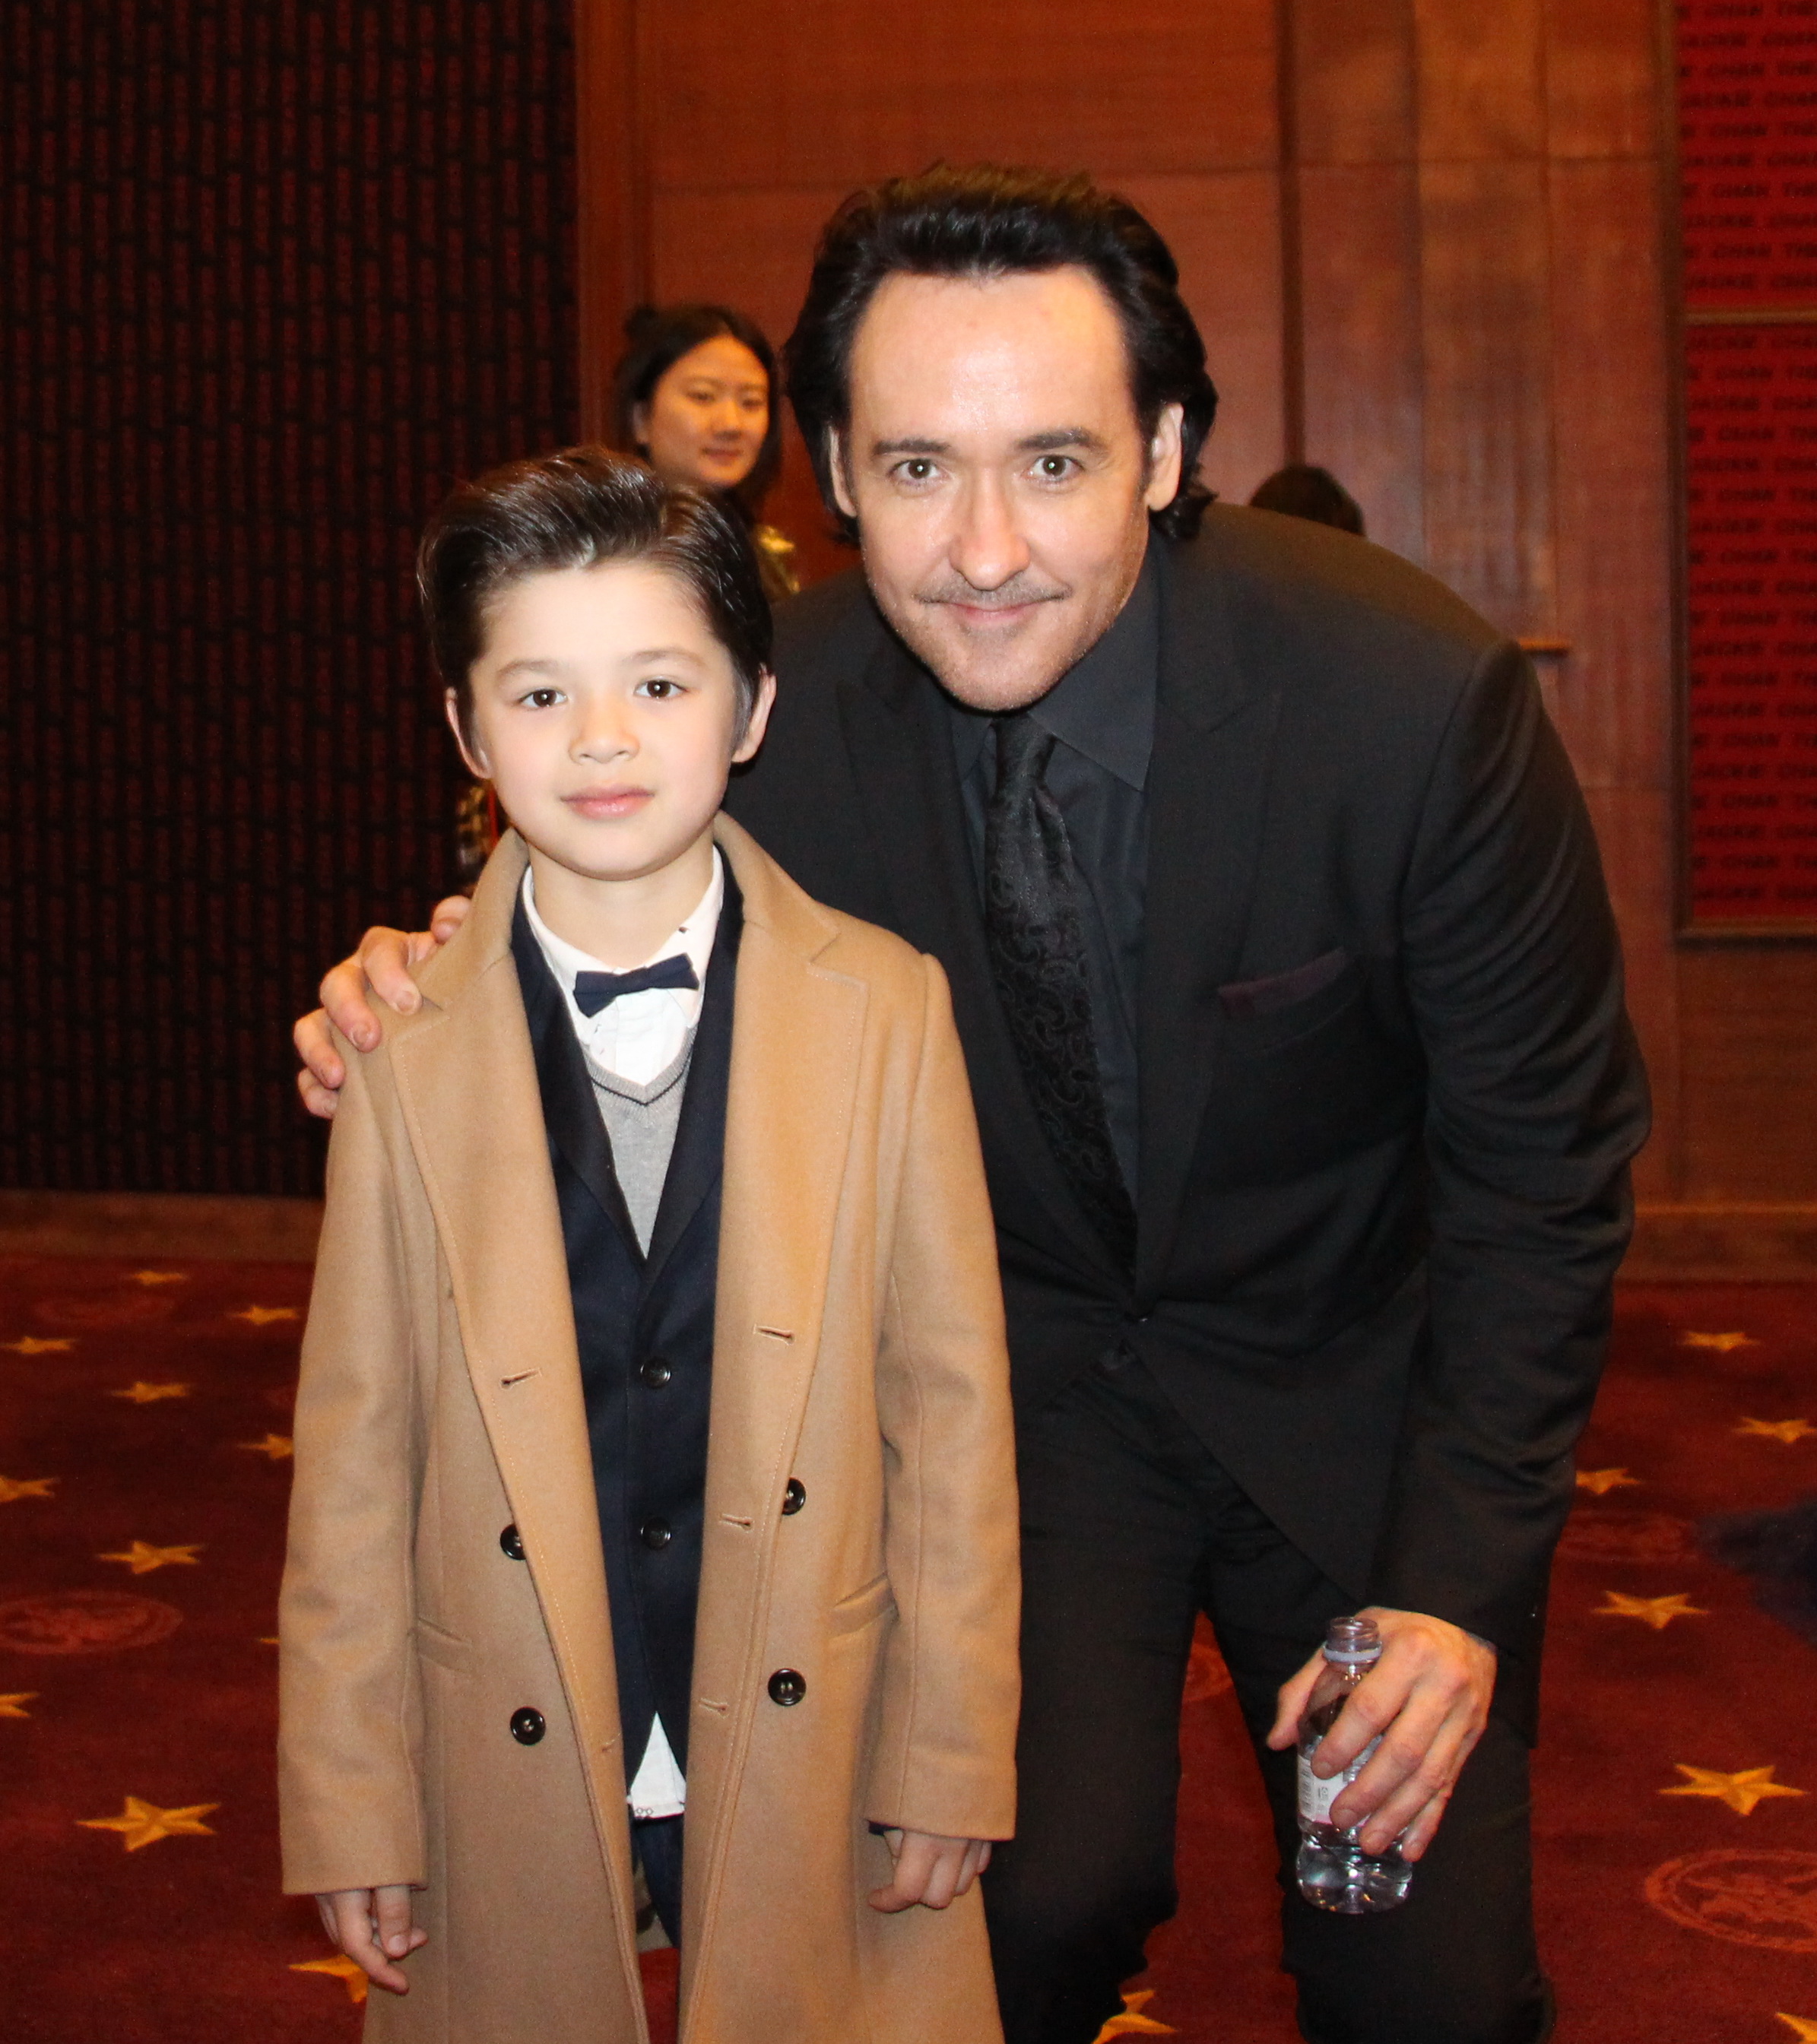 John Cusack with Jozef Waite in Beijing, China for the Dragon Blade premiere.